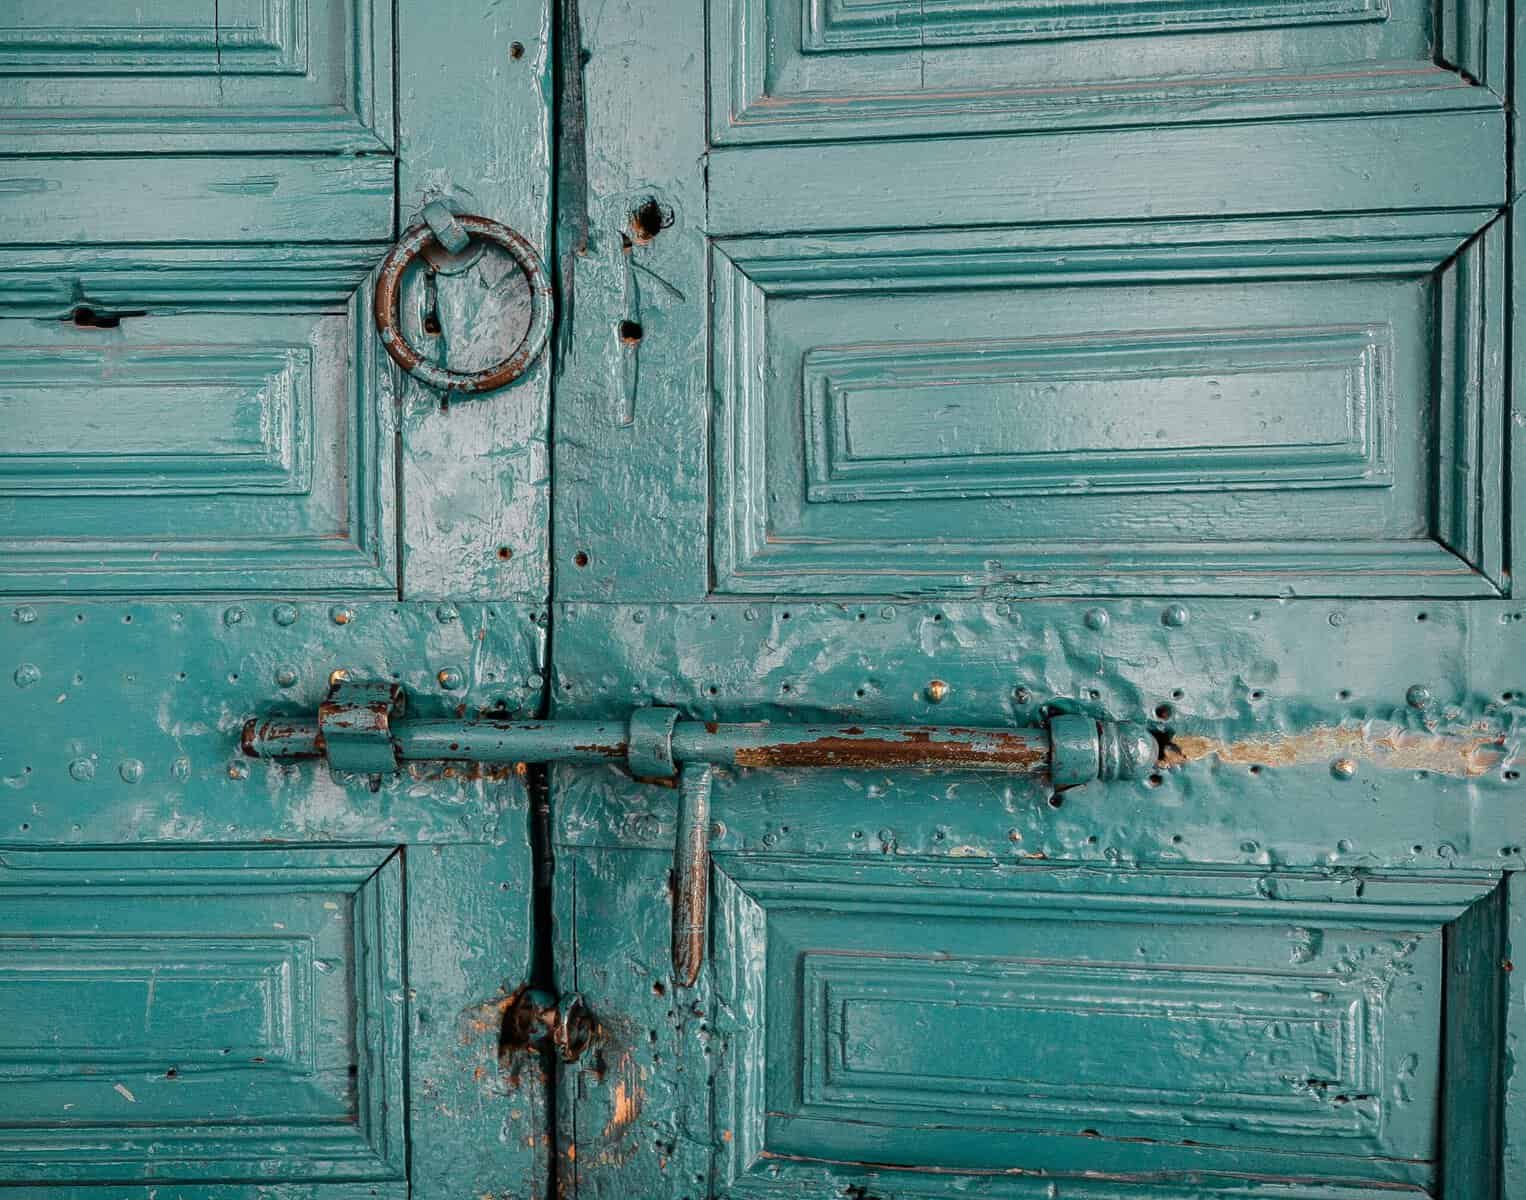 A set of old soft teal doors are shown close up with a slide lock.